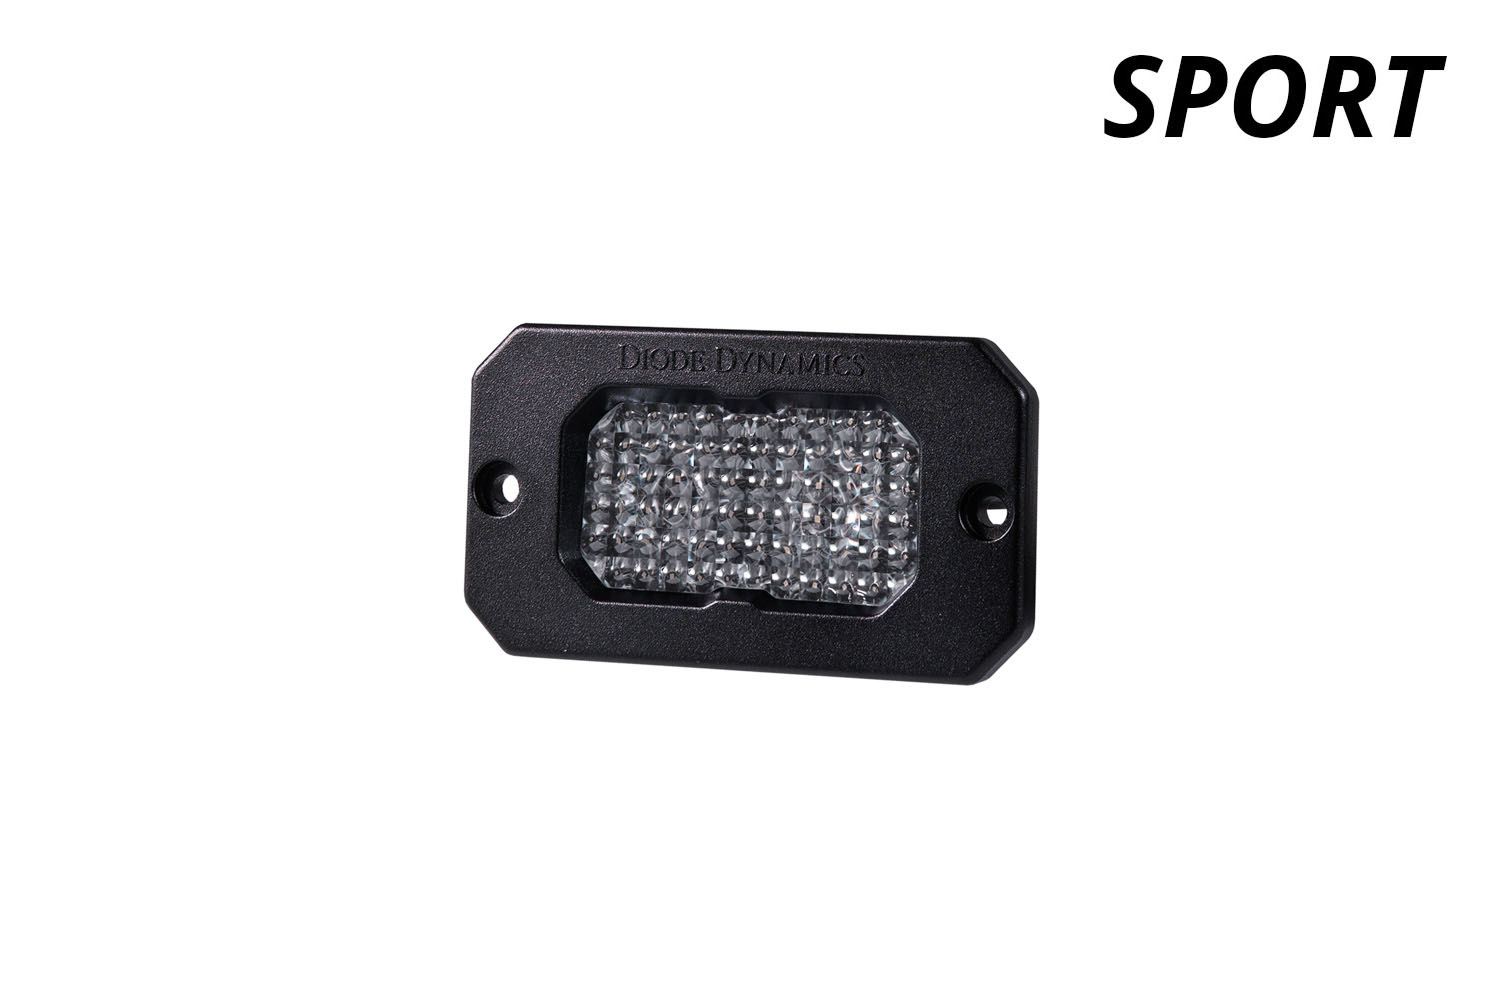 Diode Dynamics Stage Series 2 Inch LED Pod, Sport White Flood Flush BBL Each - Click Image to Close